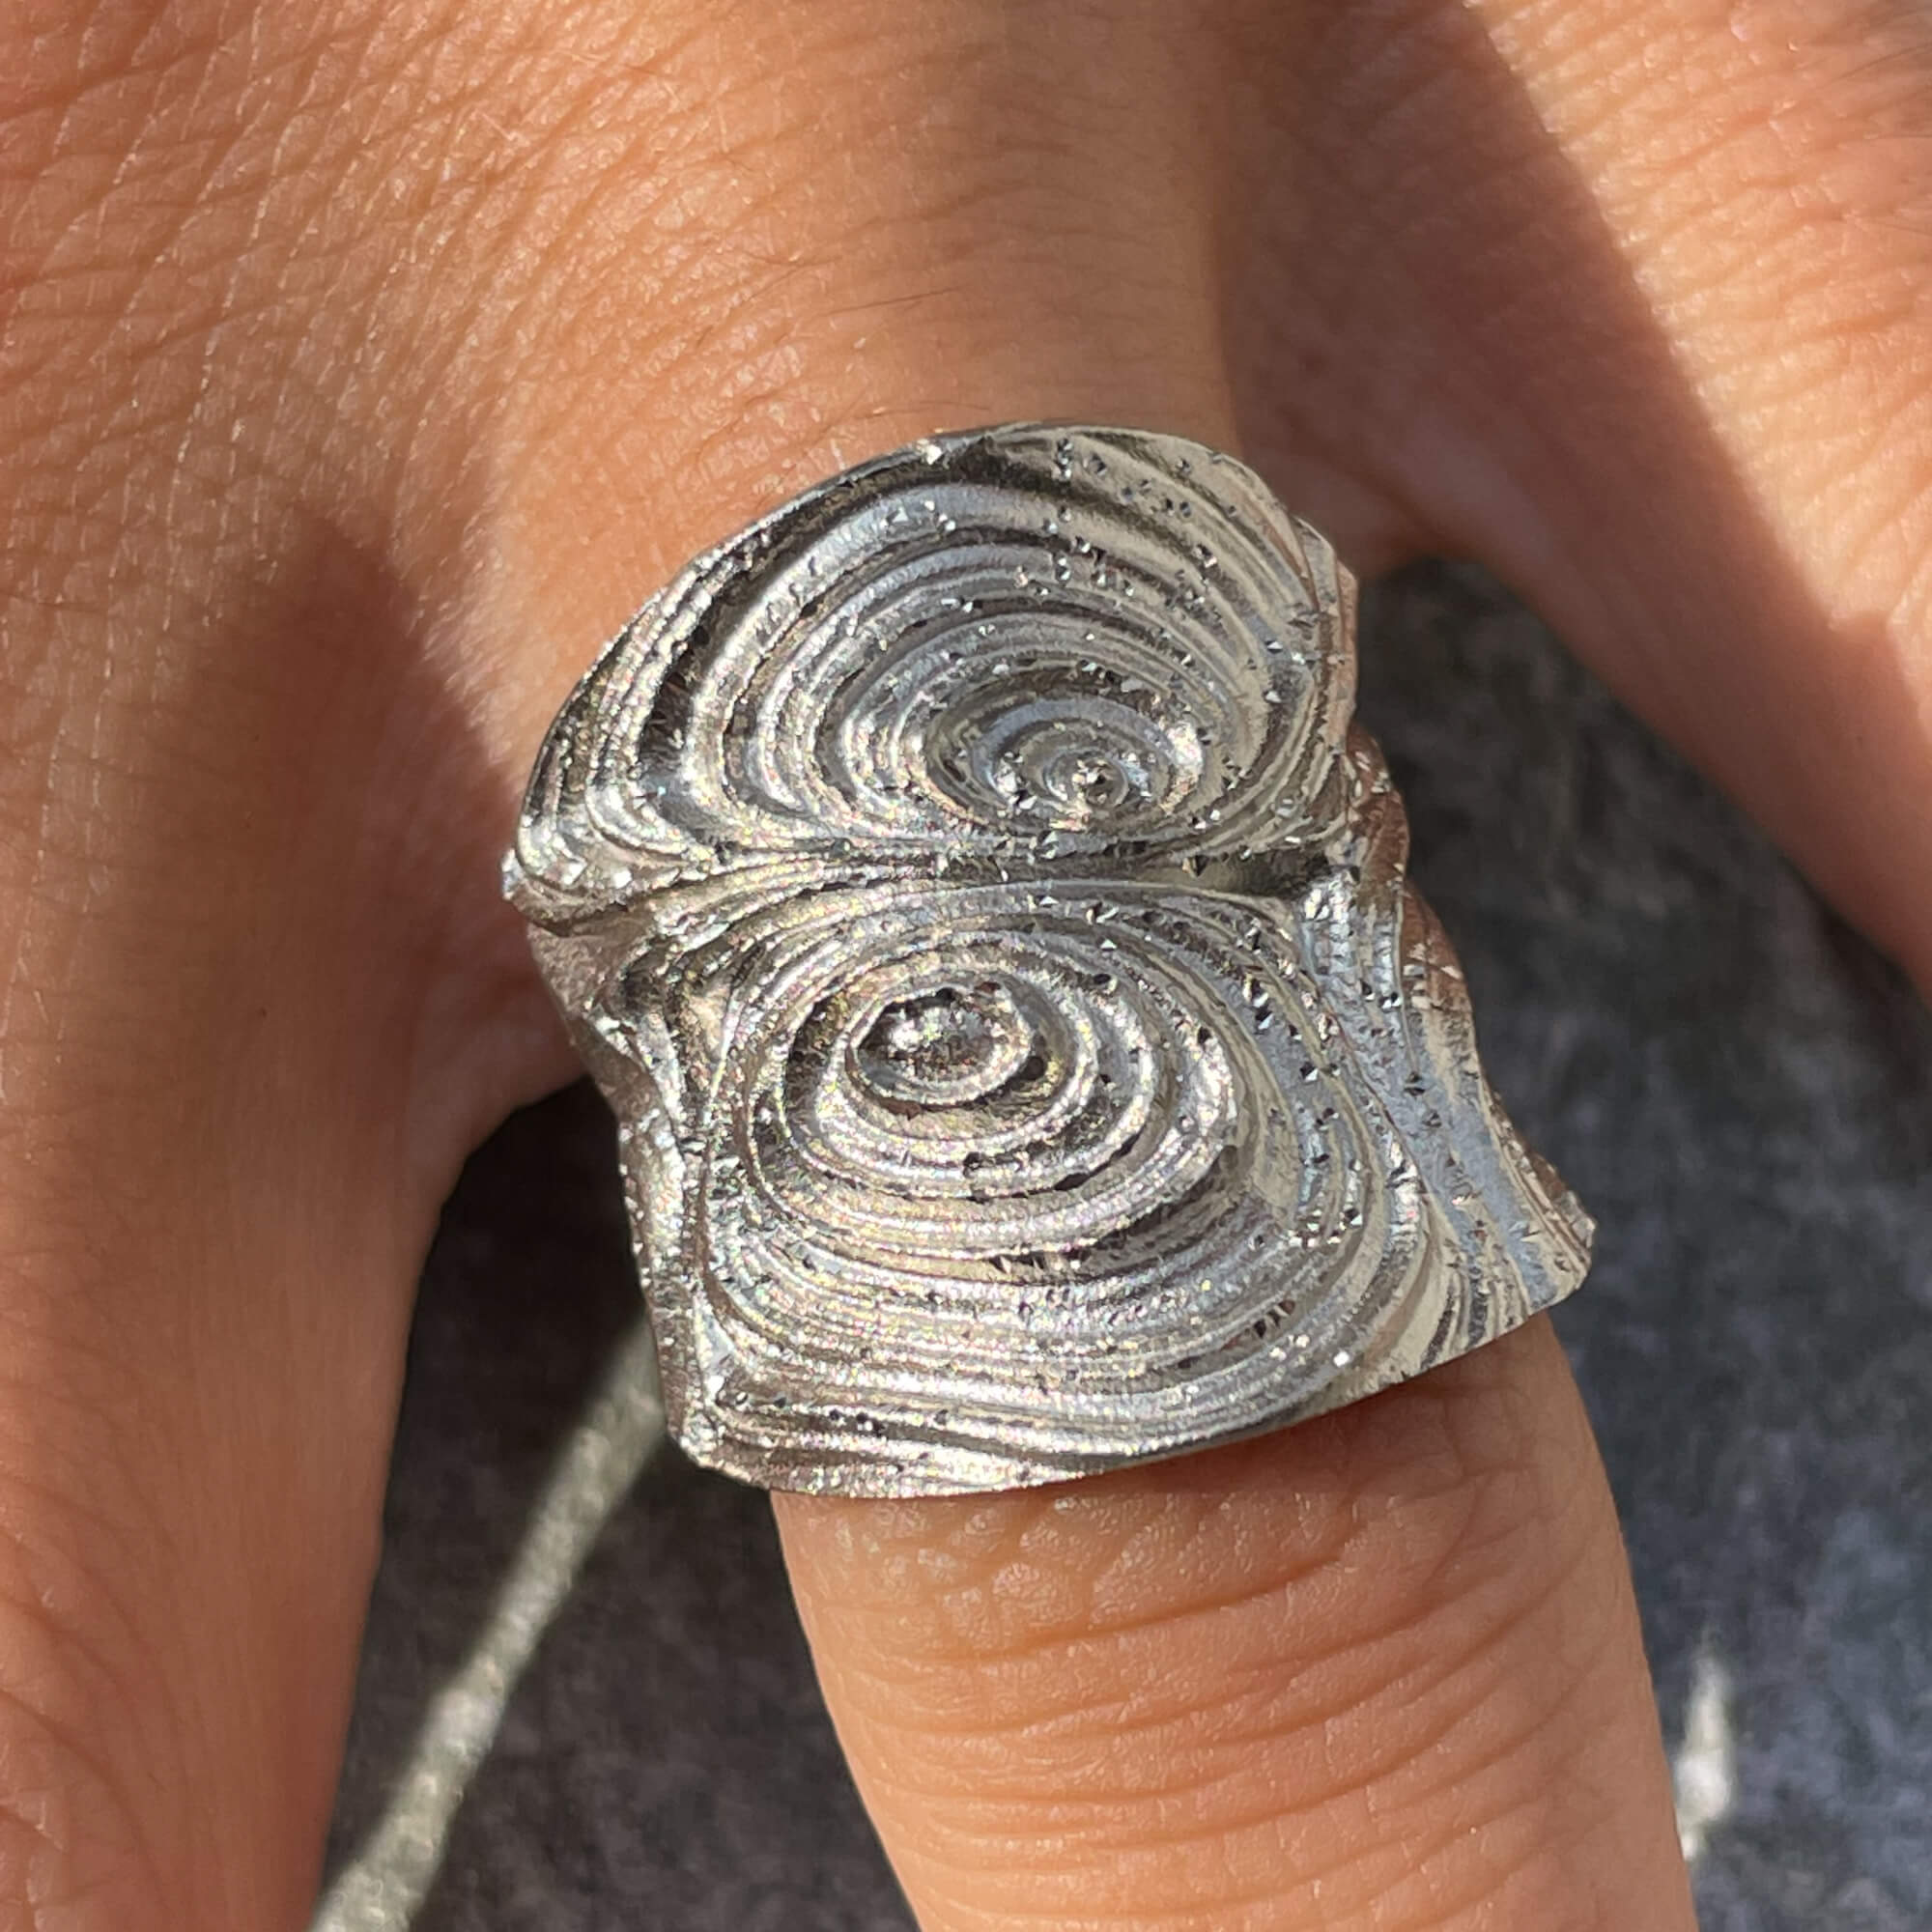 Worked sterling silver ring